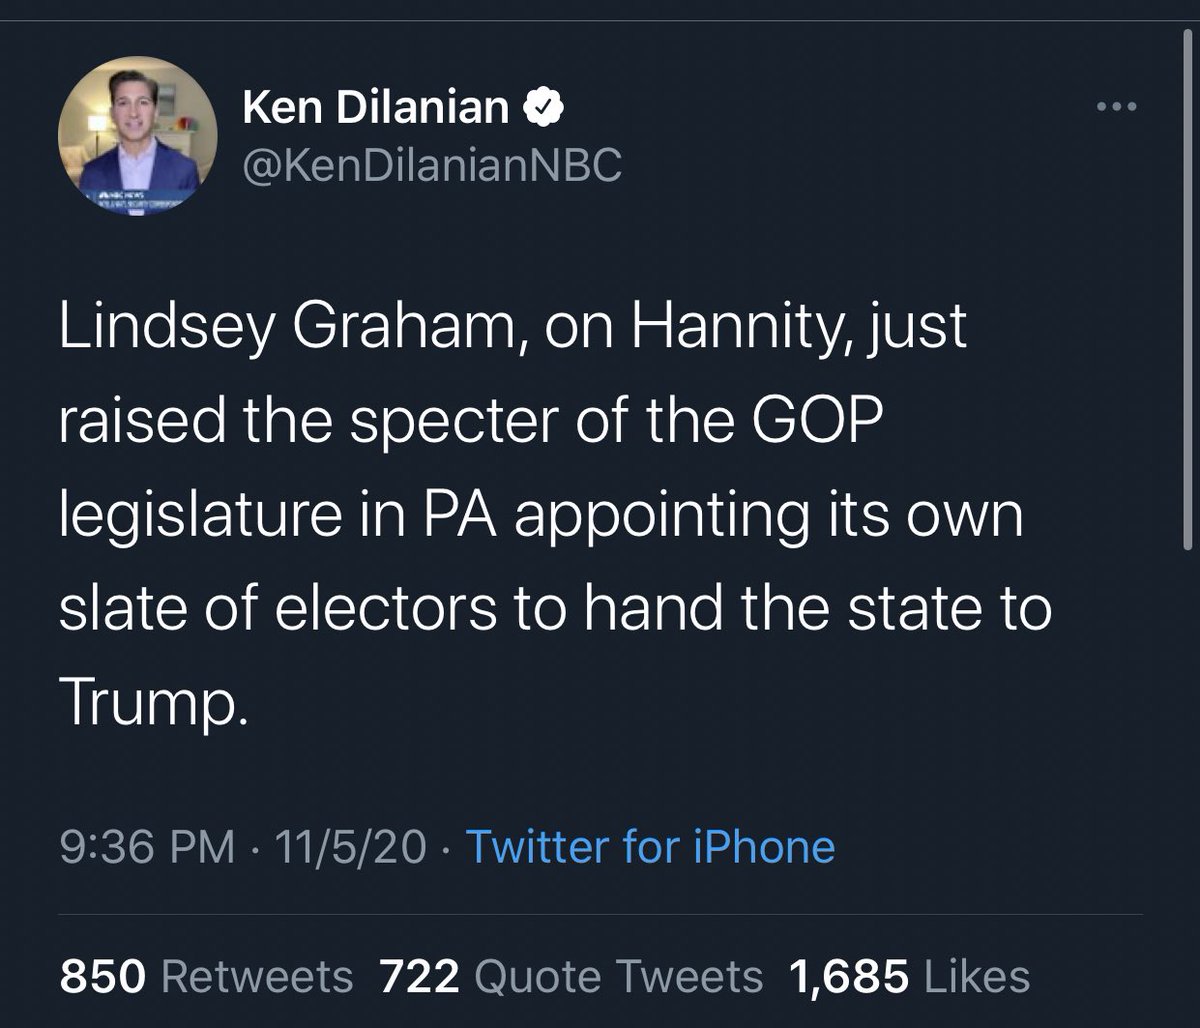 Also this week, Trump supporters started floating the idea of having GOP state legislatures go rogue and appoint their own electors, who would then be tasked with ignoring election results and handing the states (& their electoral college votes) to Trump, whether or not he won.